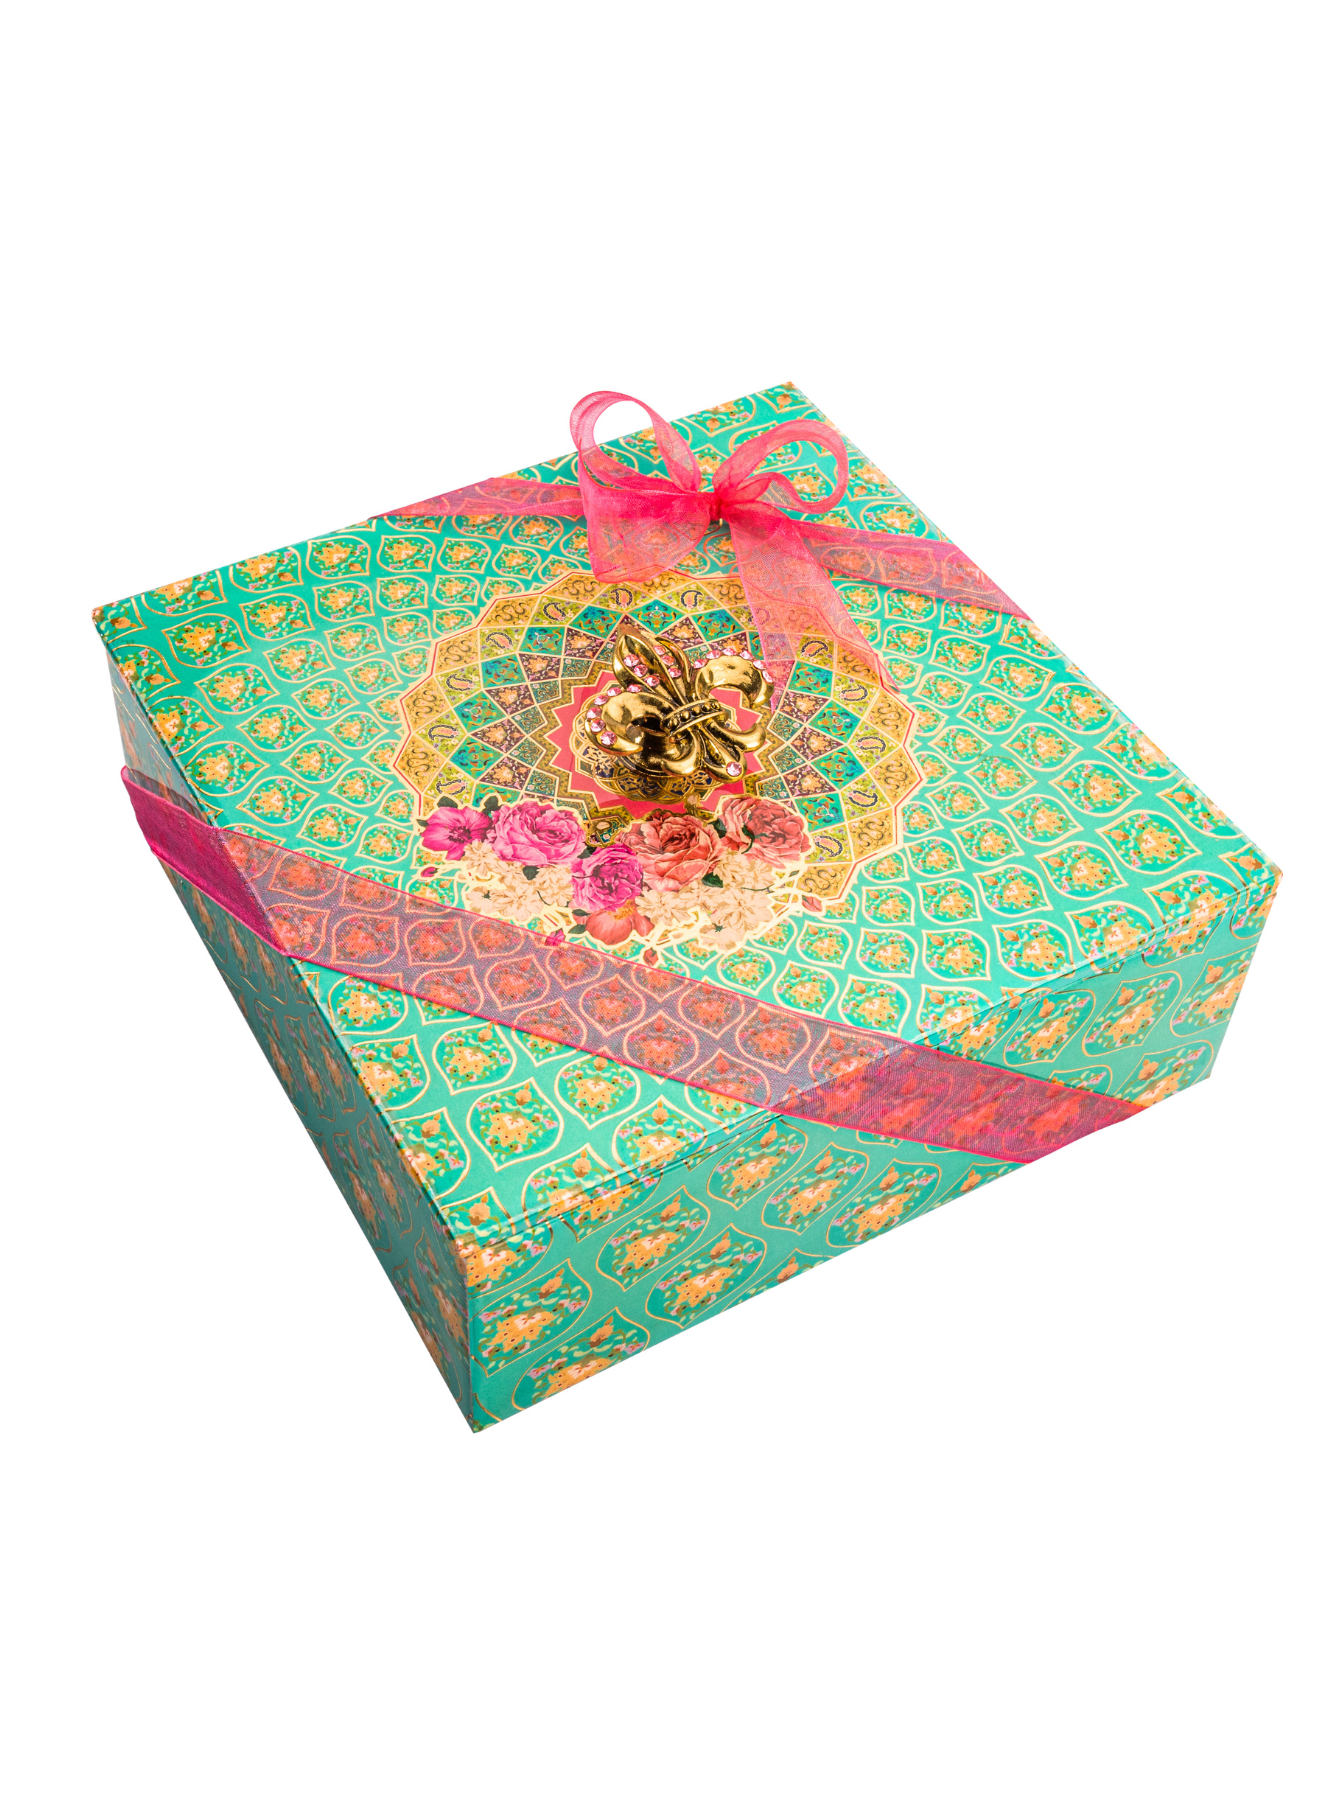 Khidri Dates with Floral Green Lacquered Box with Pink Ribbon (48 Individually Wrapped Pcs)